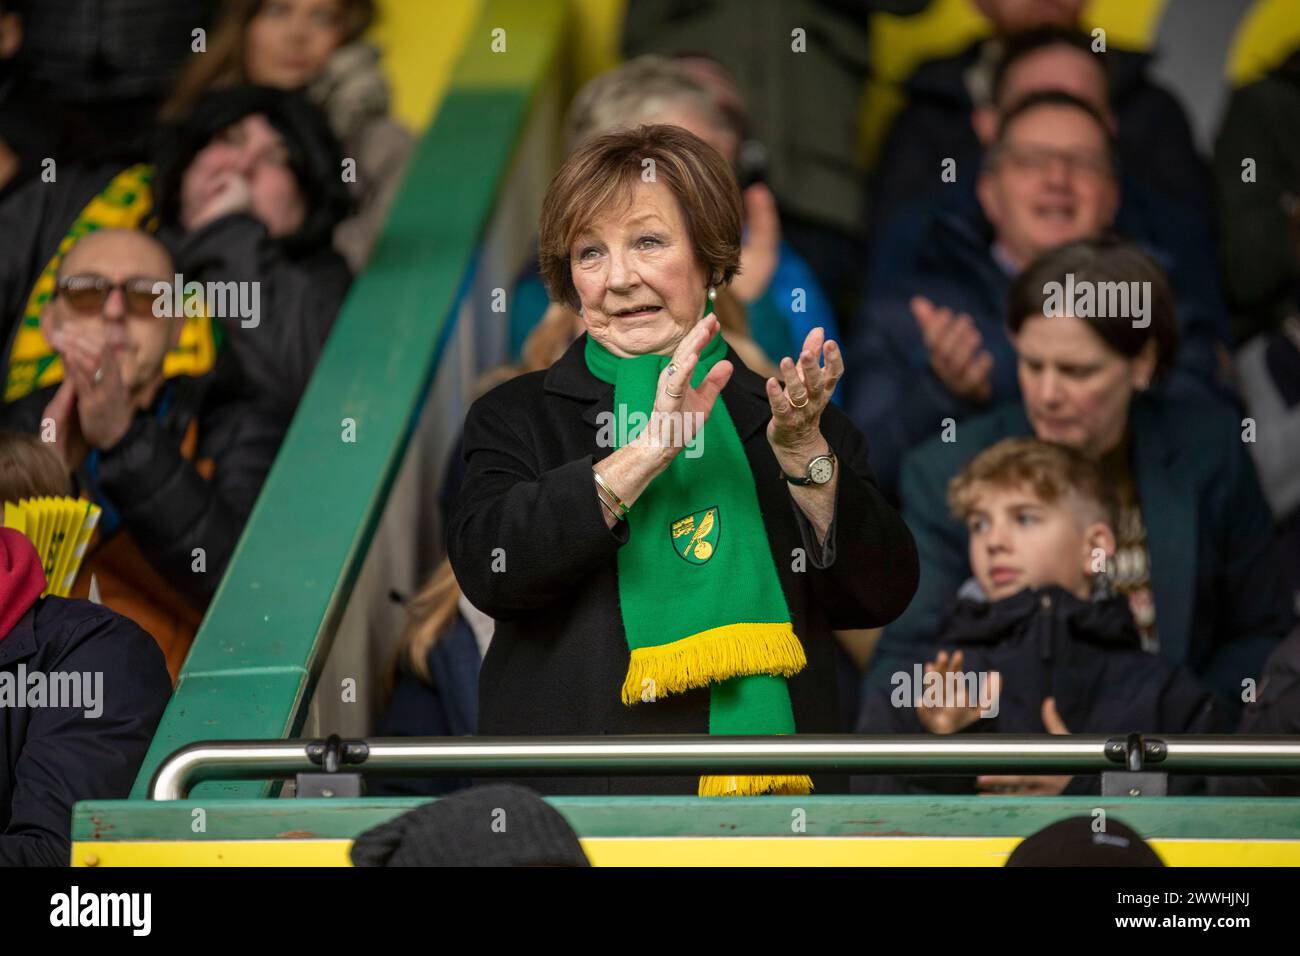 Norwich on Sunday 24th March 2024. Delia Smith, an owner of Norwich City FC is seen in the stands during the FA Women's National League Division One match between Norwich City Women and Queens Park Rangers at Carrow Road, Norwich on Sunday 24th March 2024. (Photo: David Watts | MI News) Credit: MI News & Sport /Alamy Live News Stock Photo